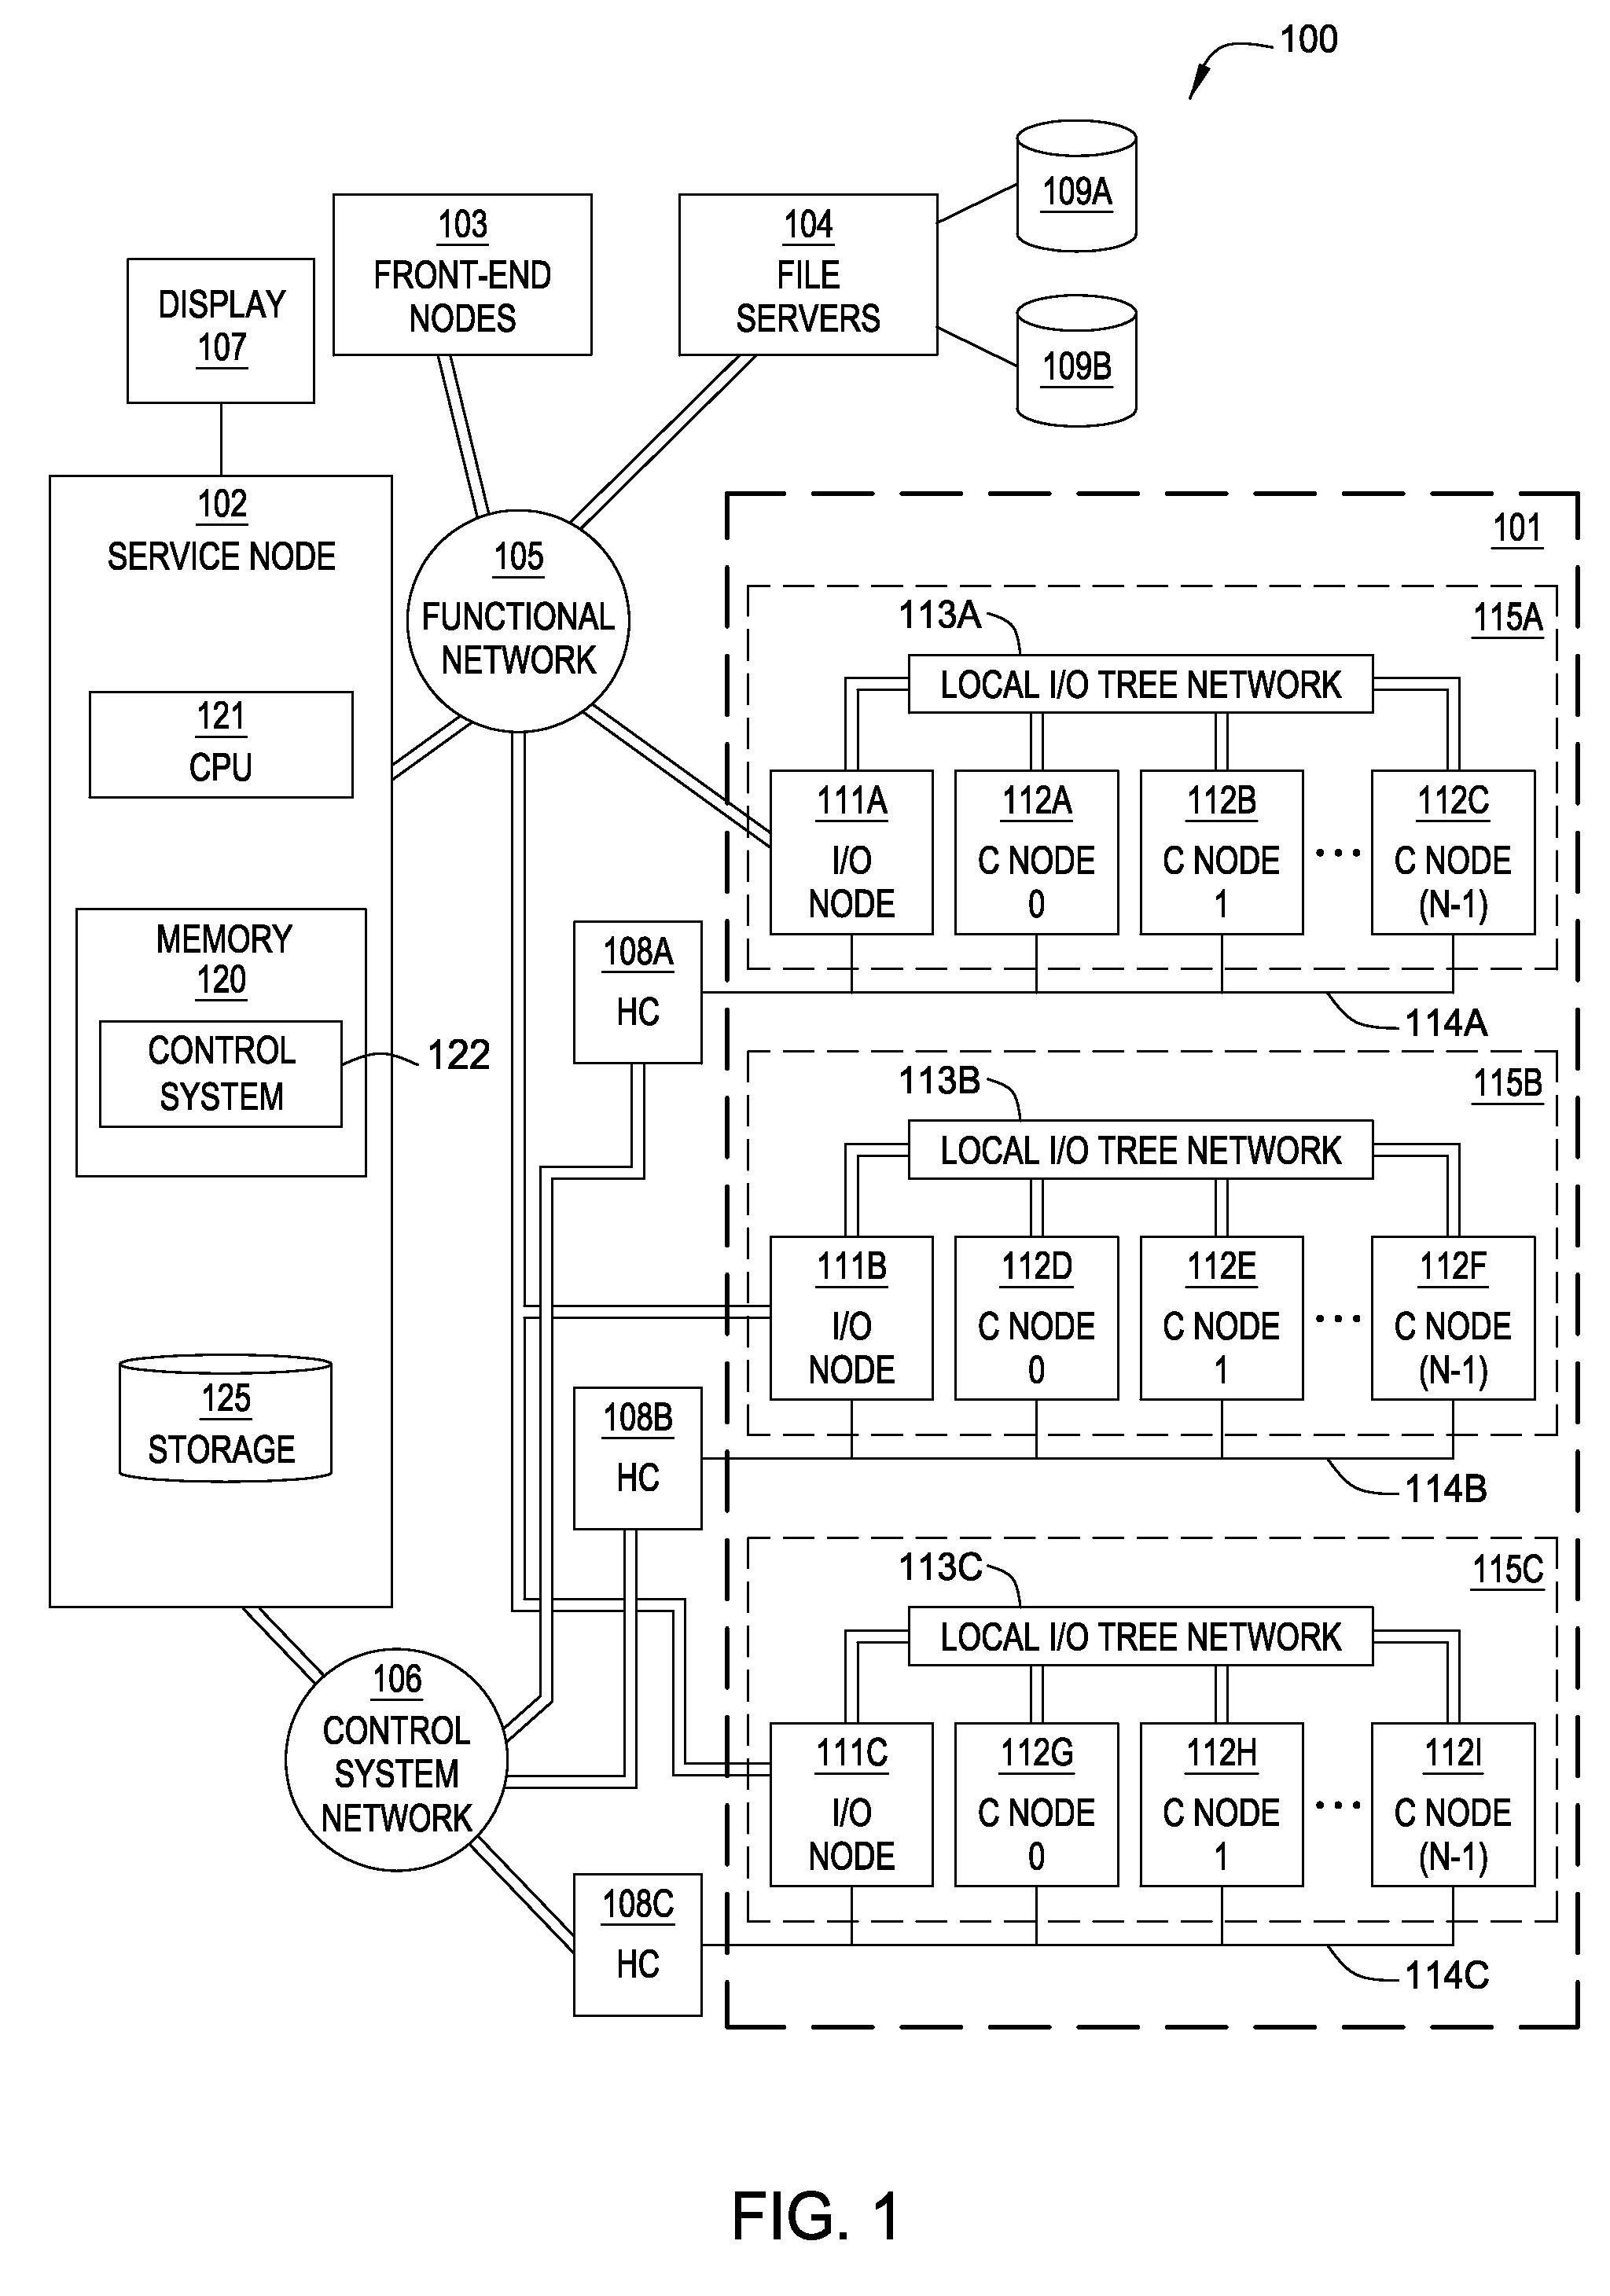 Reducing occurrences of two-phase commits in a multi-node computing system